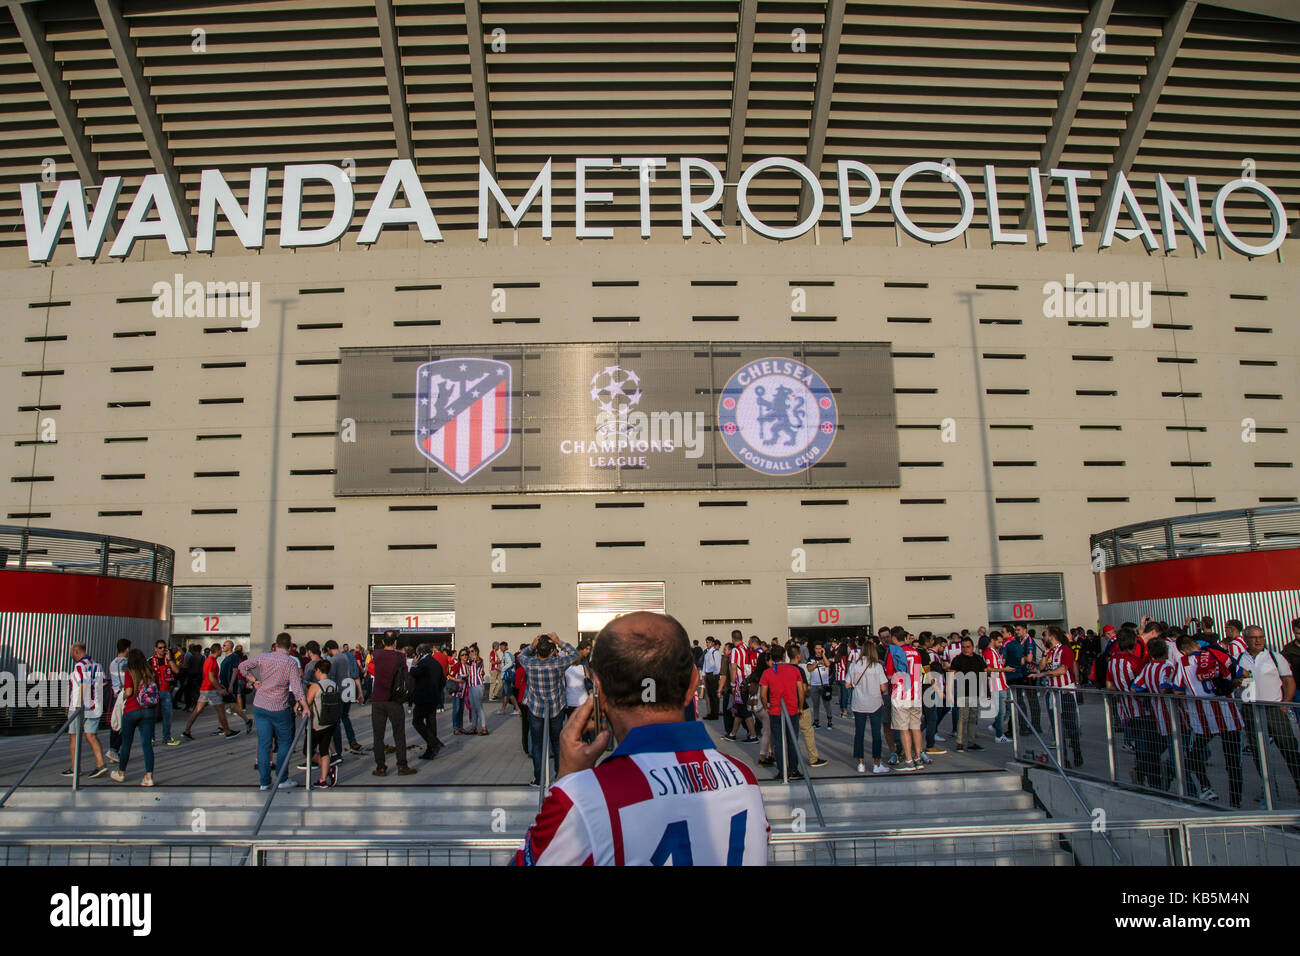 Madrid, Spain. 27th Sep. 2017. Fans arriving to Atletico de Madrid Wanda Metropolitano Stadium ahead of Champions League match against Chelsea in Madrid, Spain. Credit: Marcos del Mazo/Alamy Live News Stock Photo